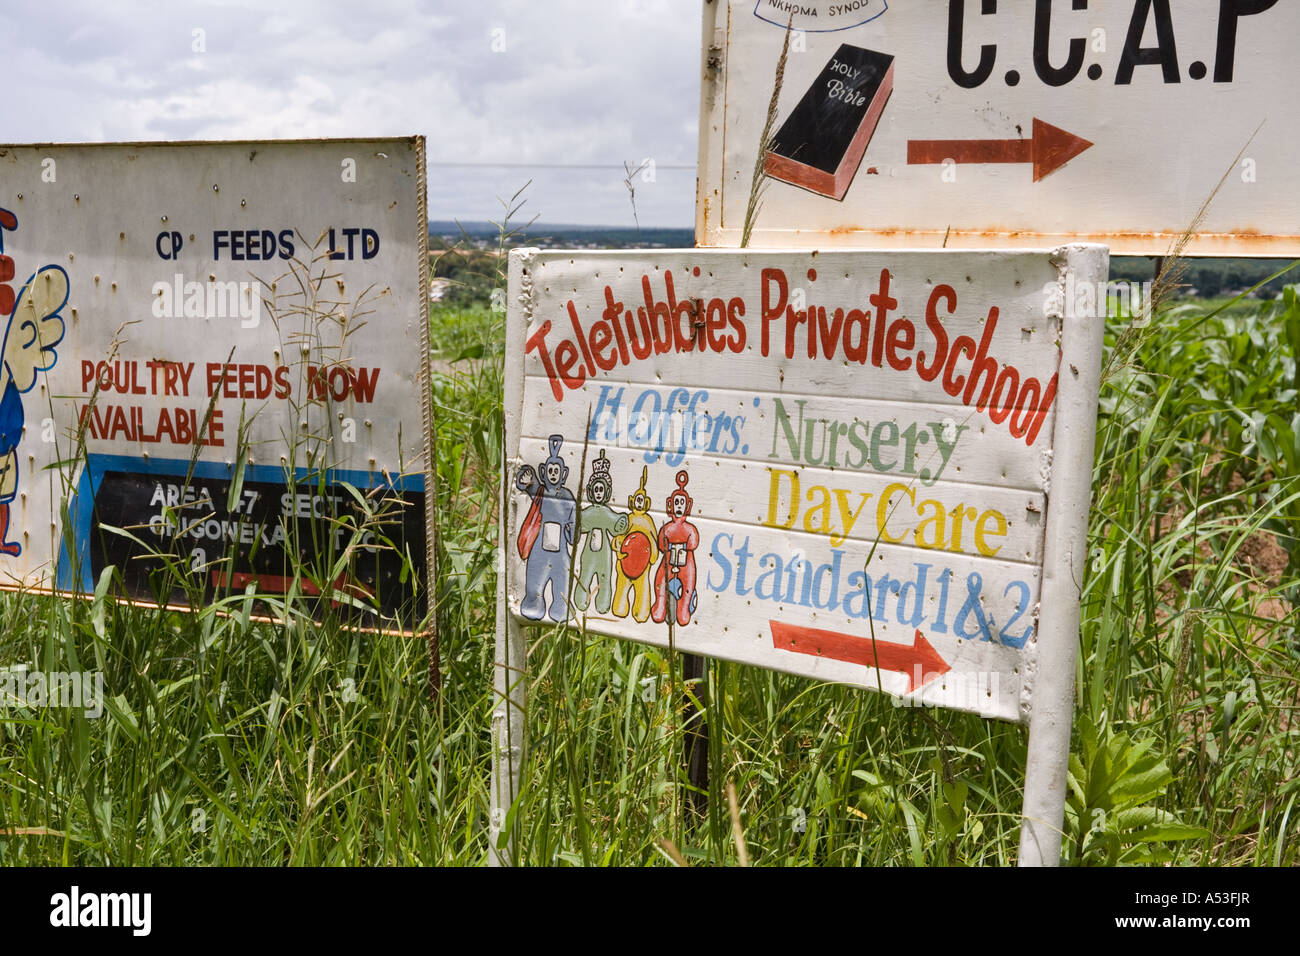 Teletubbies Private School promoted on an advertising sign beside the road in Area 47 Lilongwe Malawi Africa Stock Photo